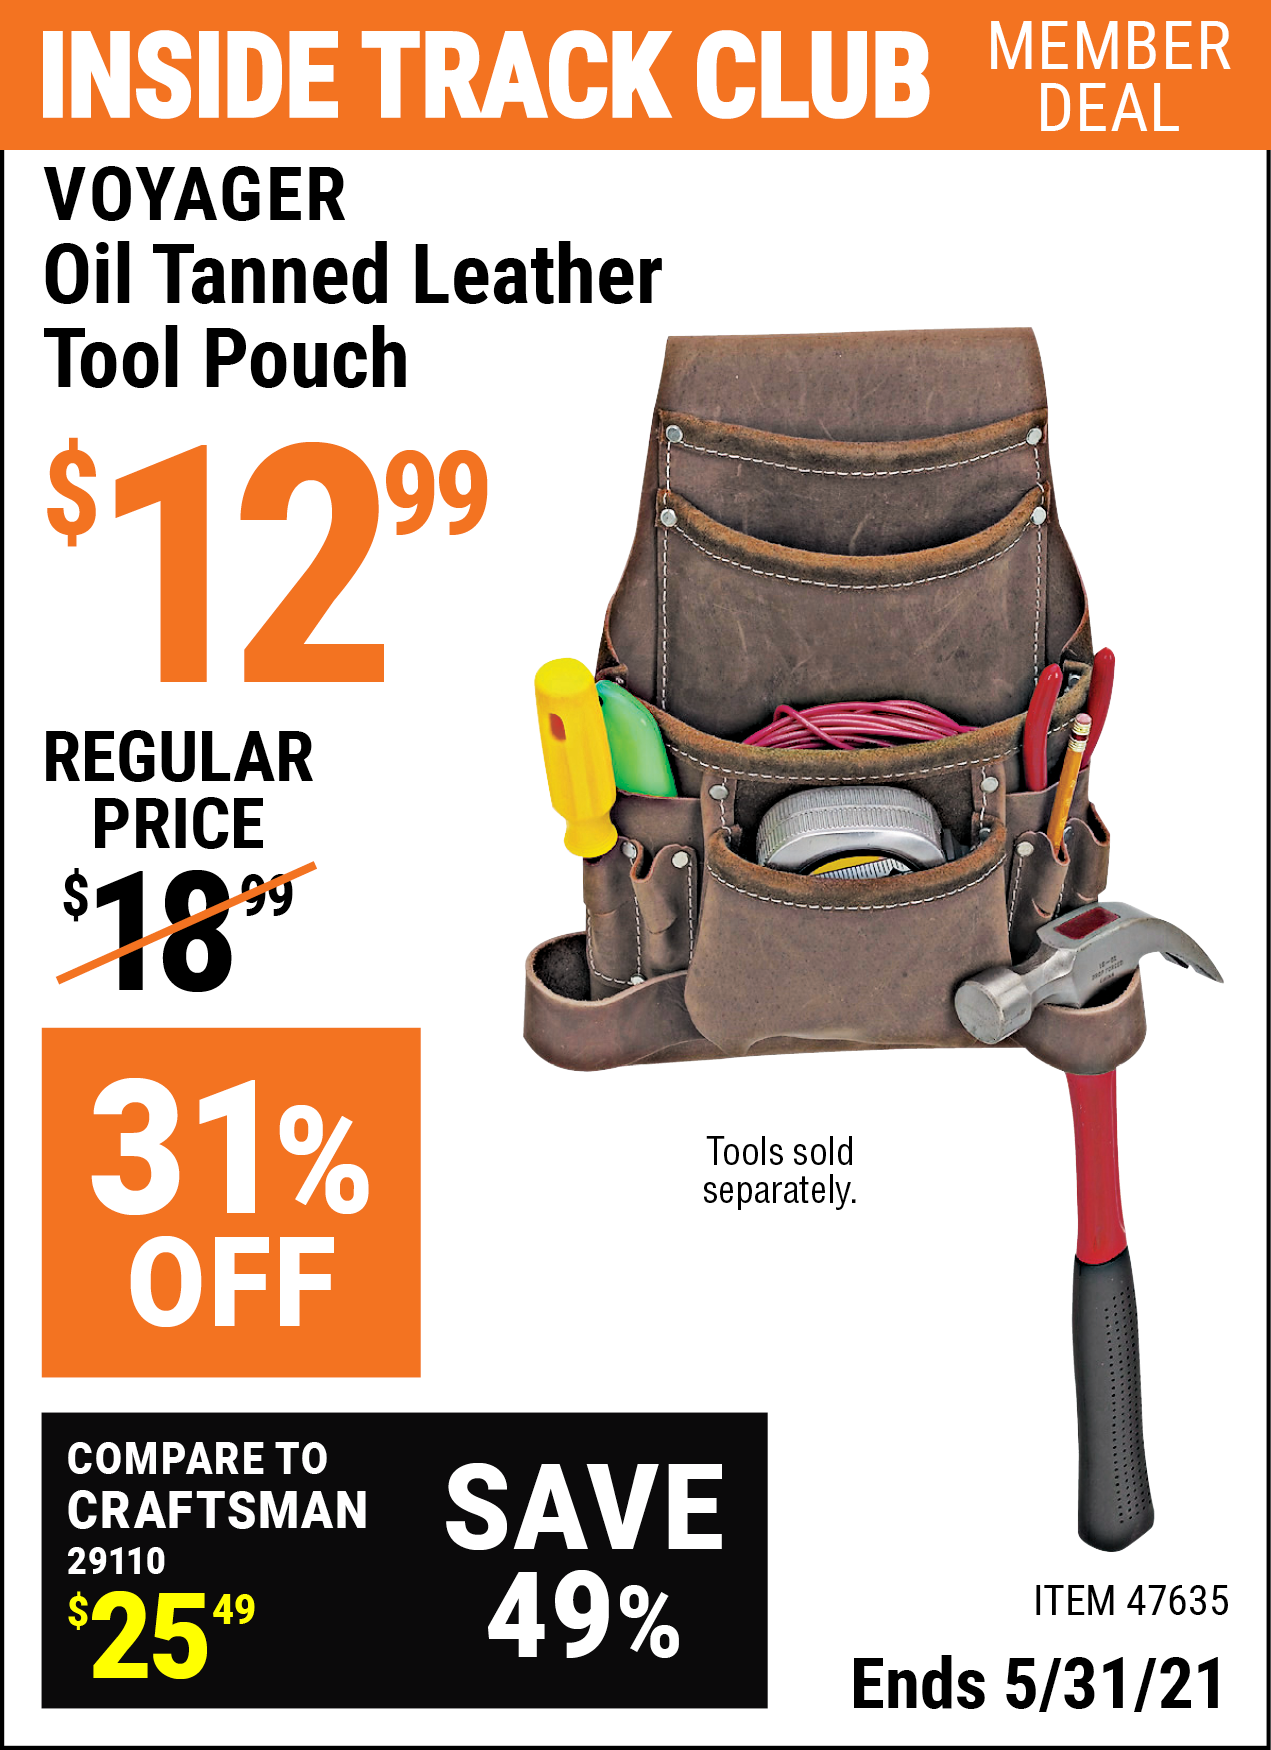 Inside Track Club members can buy the VOYAGER Oil Tanned Leather Tool Pouch (Item 47635) for $12.99, valid through 5/31/2021.